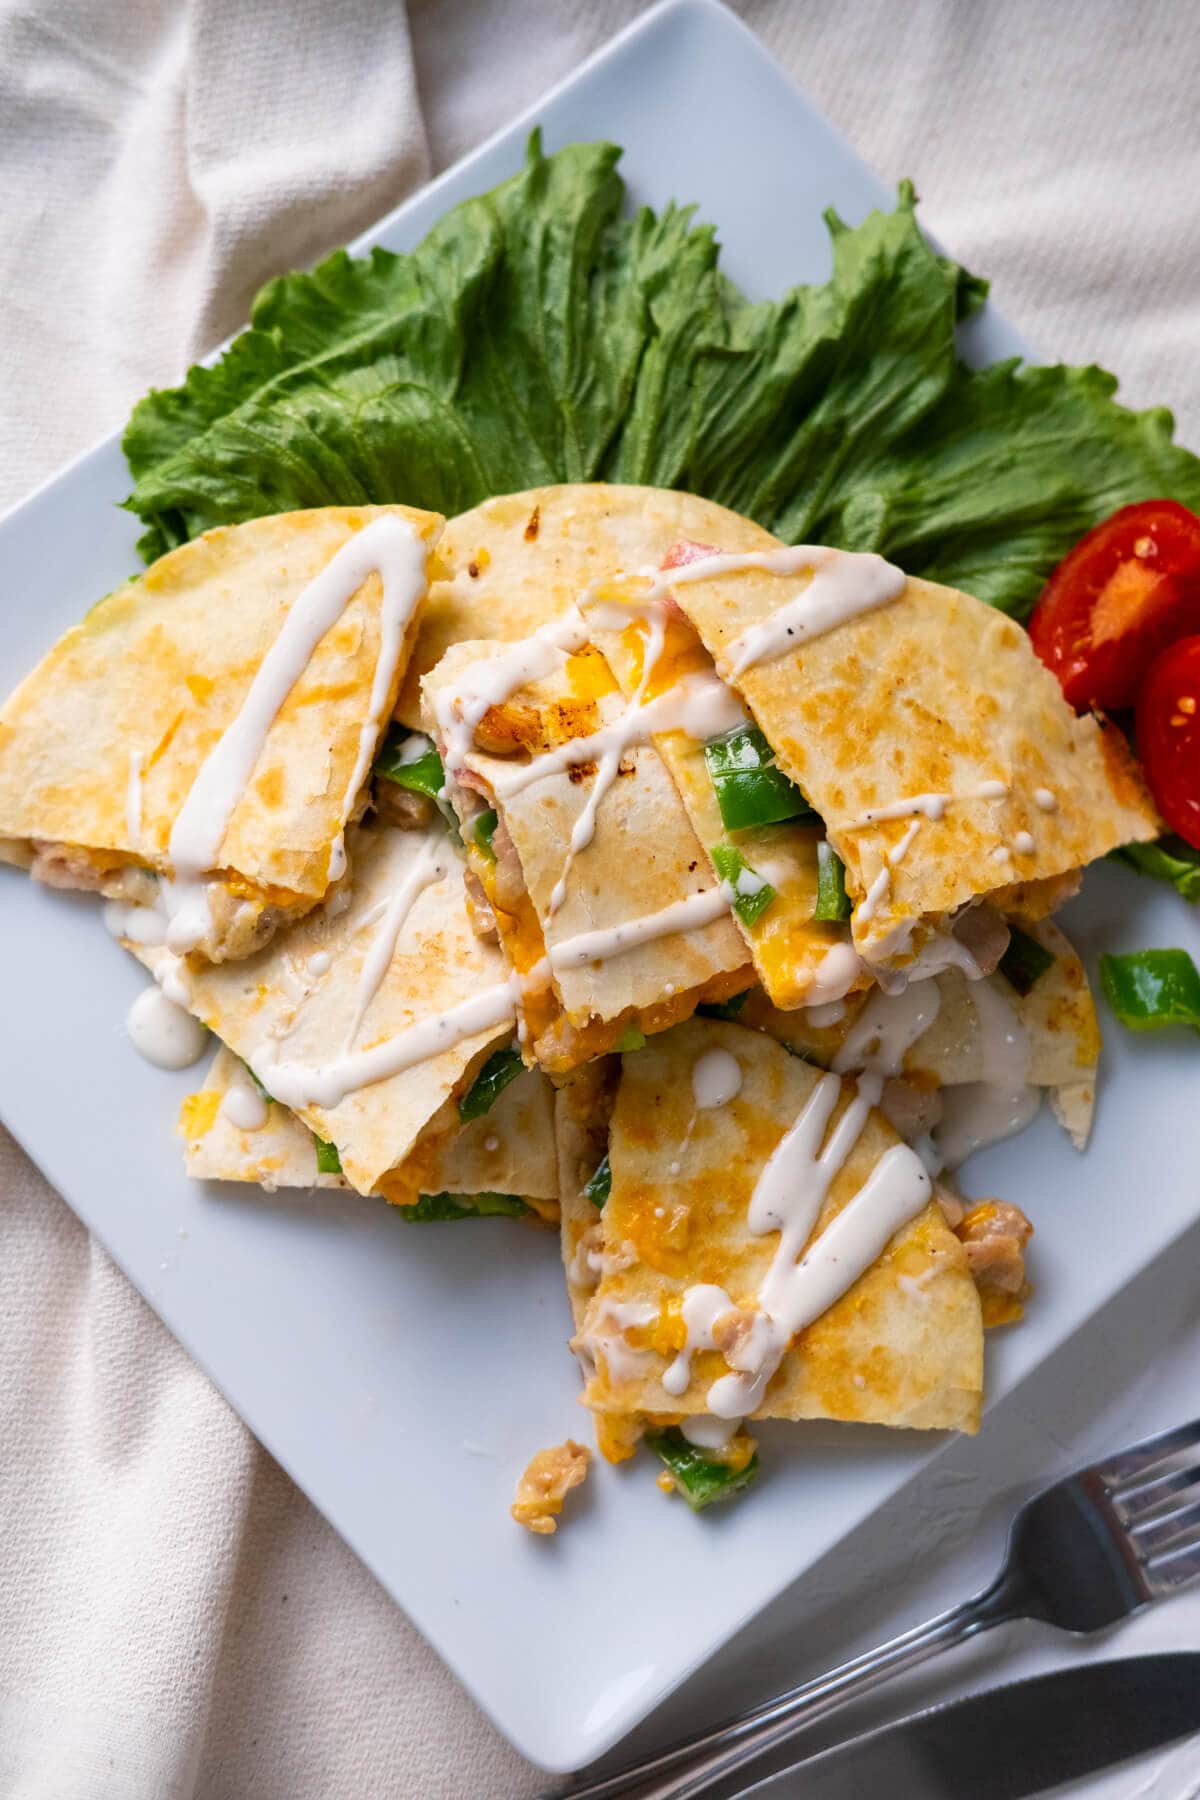 Chicken and bacon quesadilla with melty cheese and flavor chicken and bacon for its filling. 